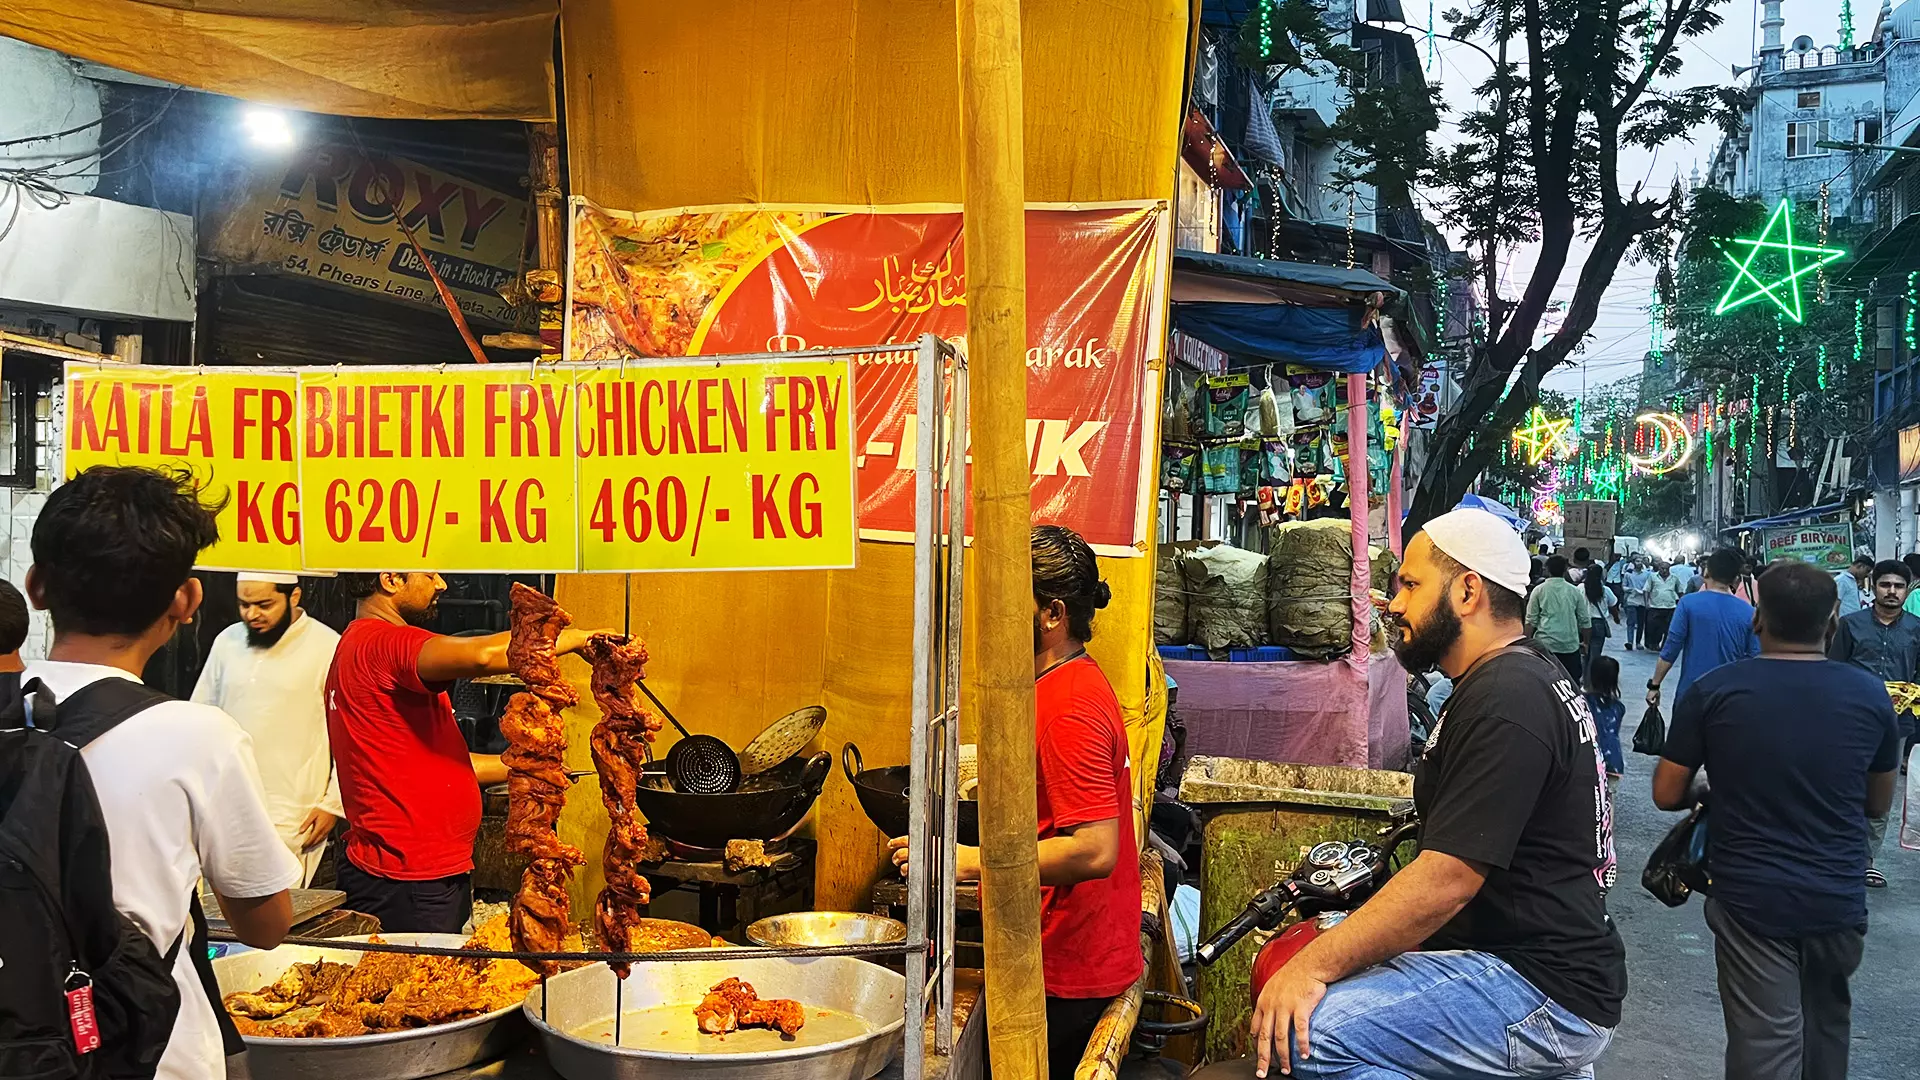 Taskeen, Dilli 6, Sufia, Al Baik, Bombay Hotel are eateries that immediately come to the mind for their authentic lip-smacking biryani, kebabs, murg changezi, haleem, Afghani chicken, chaanp, mahi akbari to name a few.